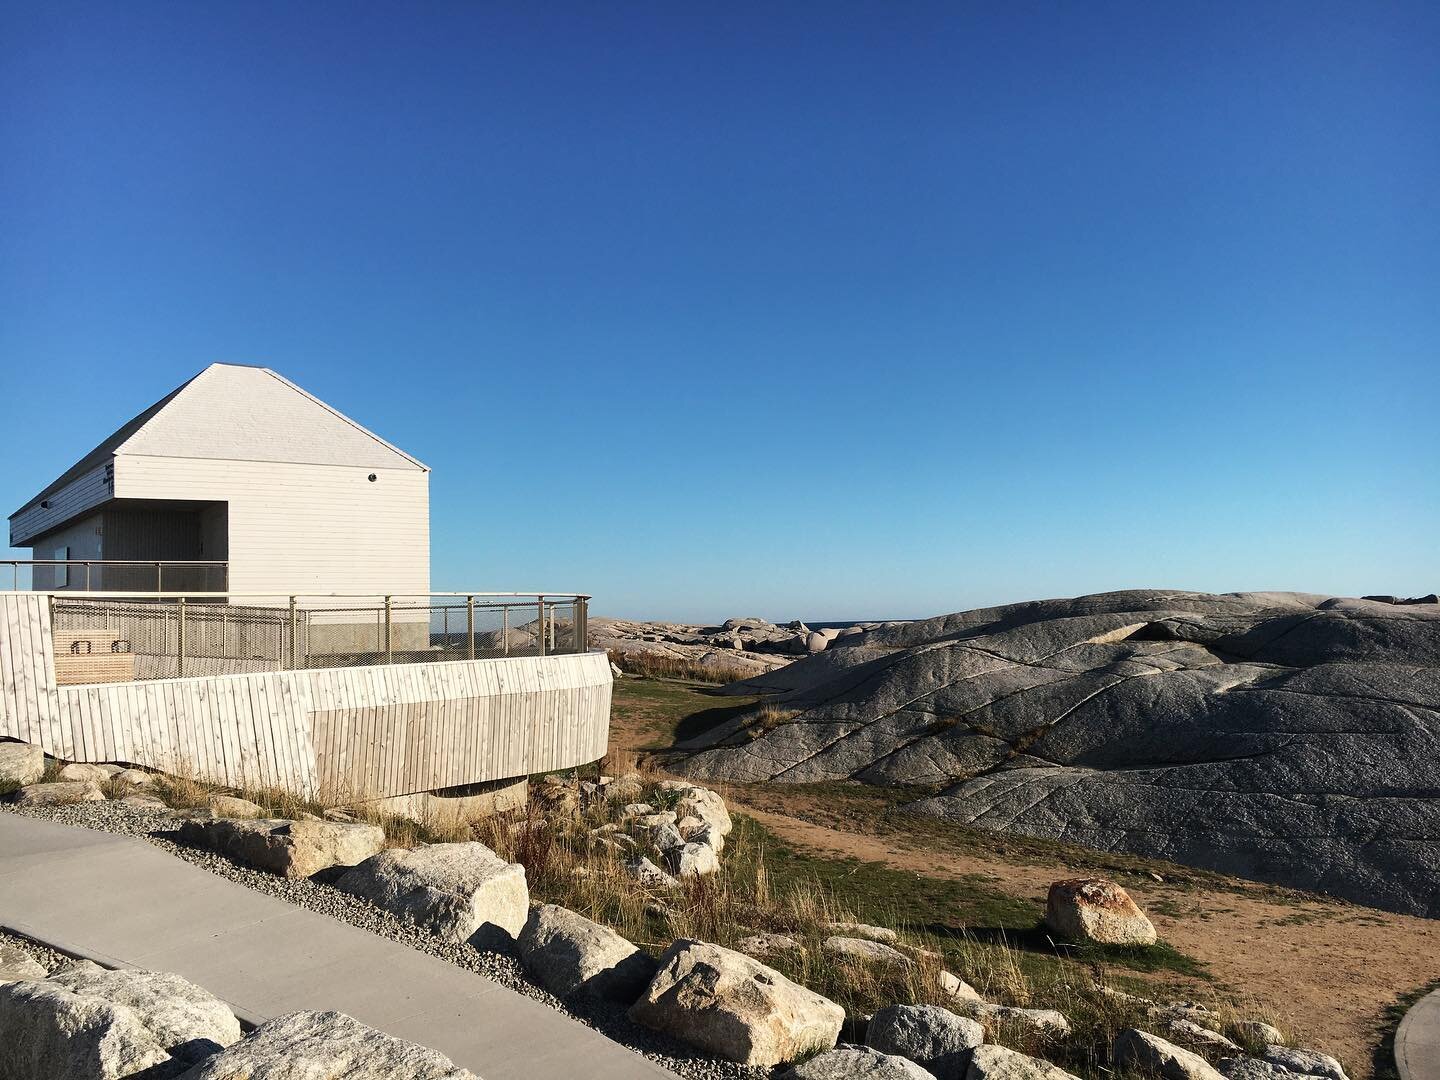 Excited to finally visit the new viewing platform and washrooms at Peggy&rsquo;s Cove, so brilliantly designed to integrate into this iconic landscape. The new structures and pathways enhance the views with strong sightlines and emphasize the lightho